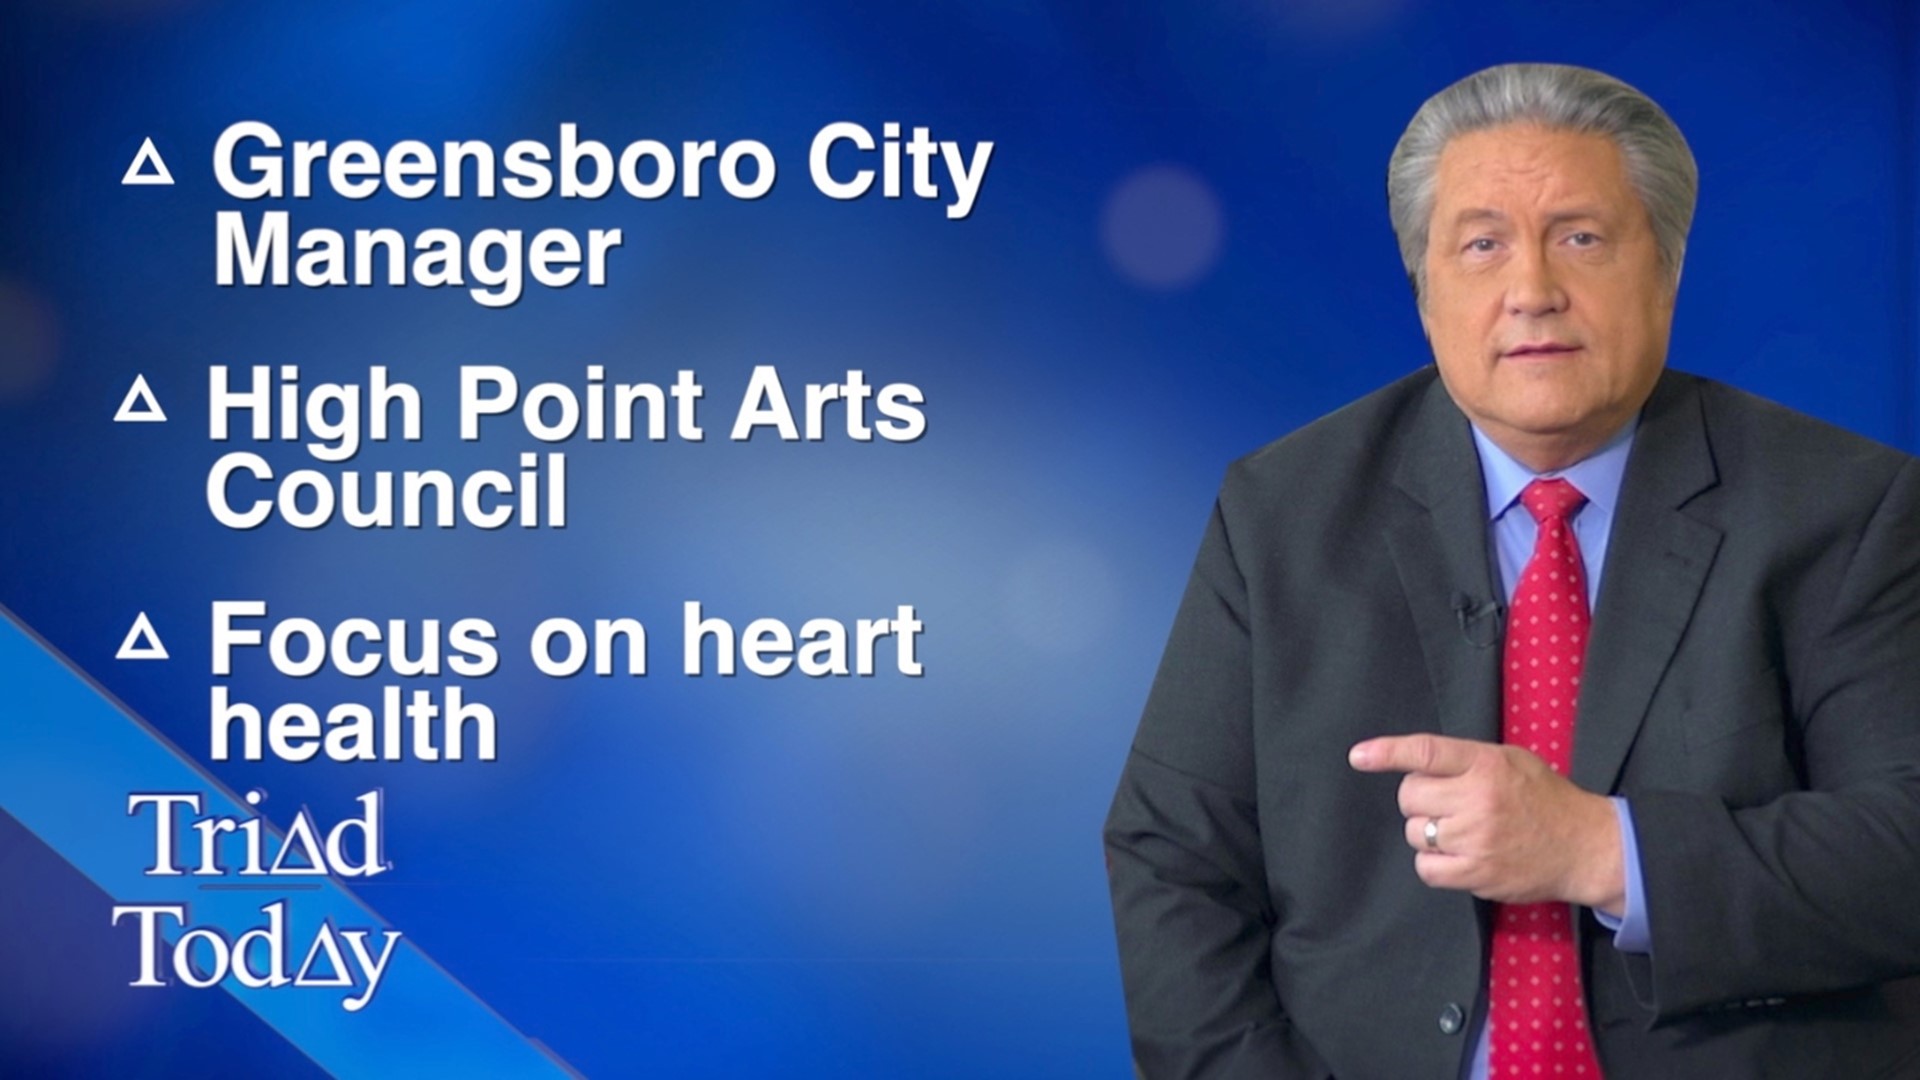 On this episode of Triad Today, the Greensboro City Manager, High Point Arts Council, business services from Triad Goodwill, and a focus on heart health.